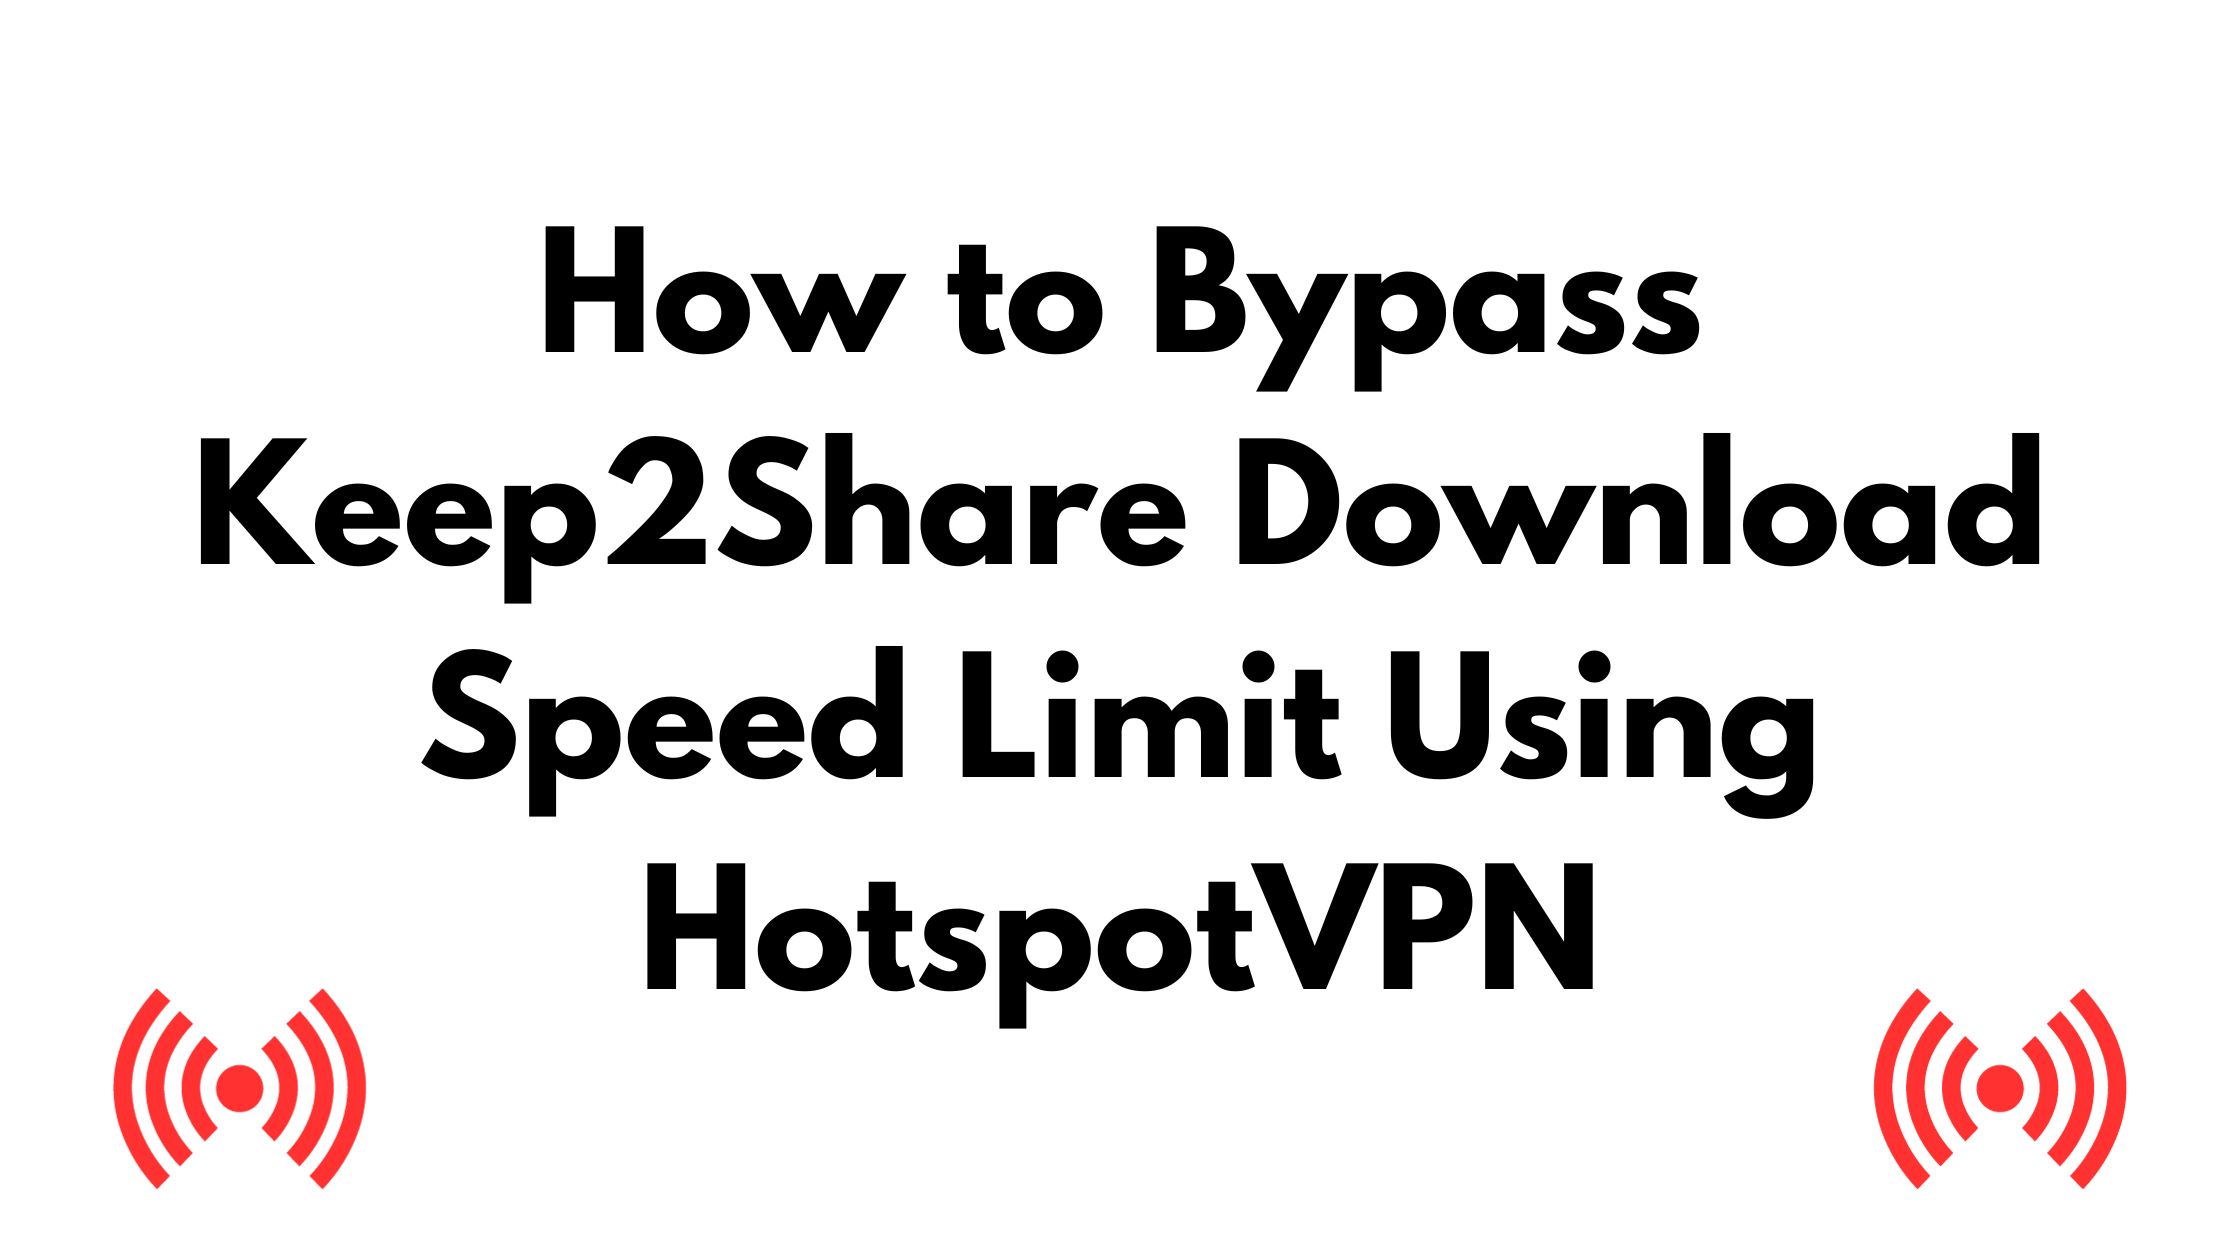 How to Bypass Keep2Share Download Speed Limit Using HotspotVPN